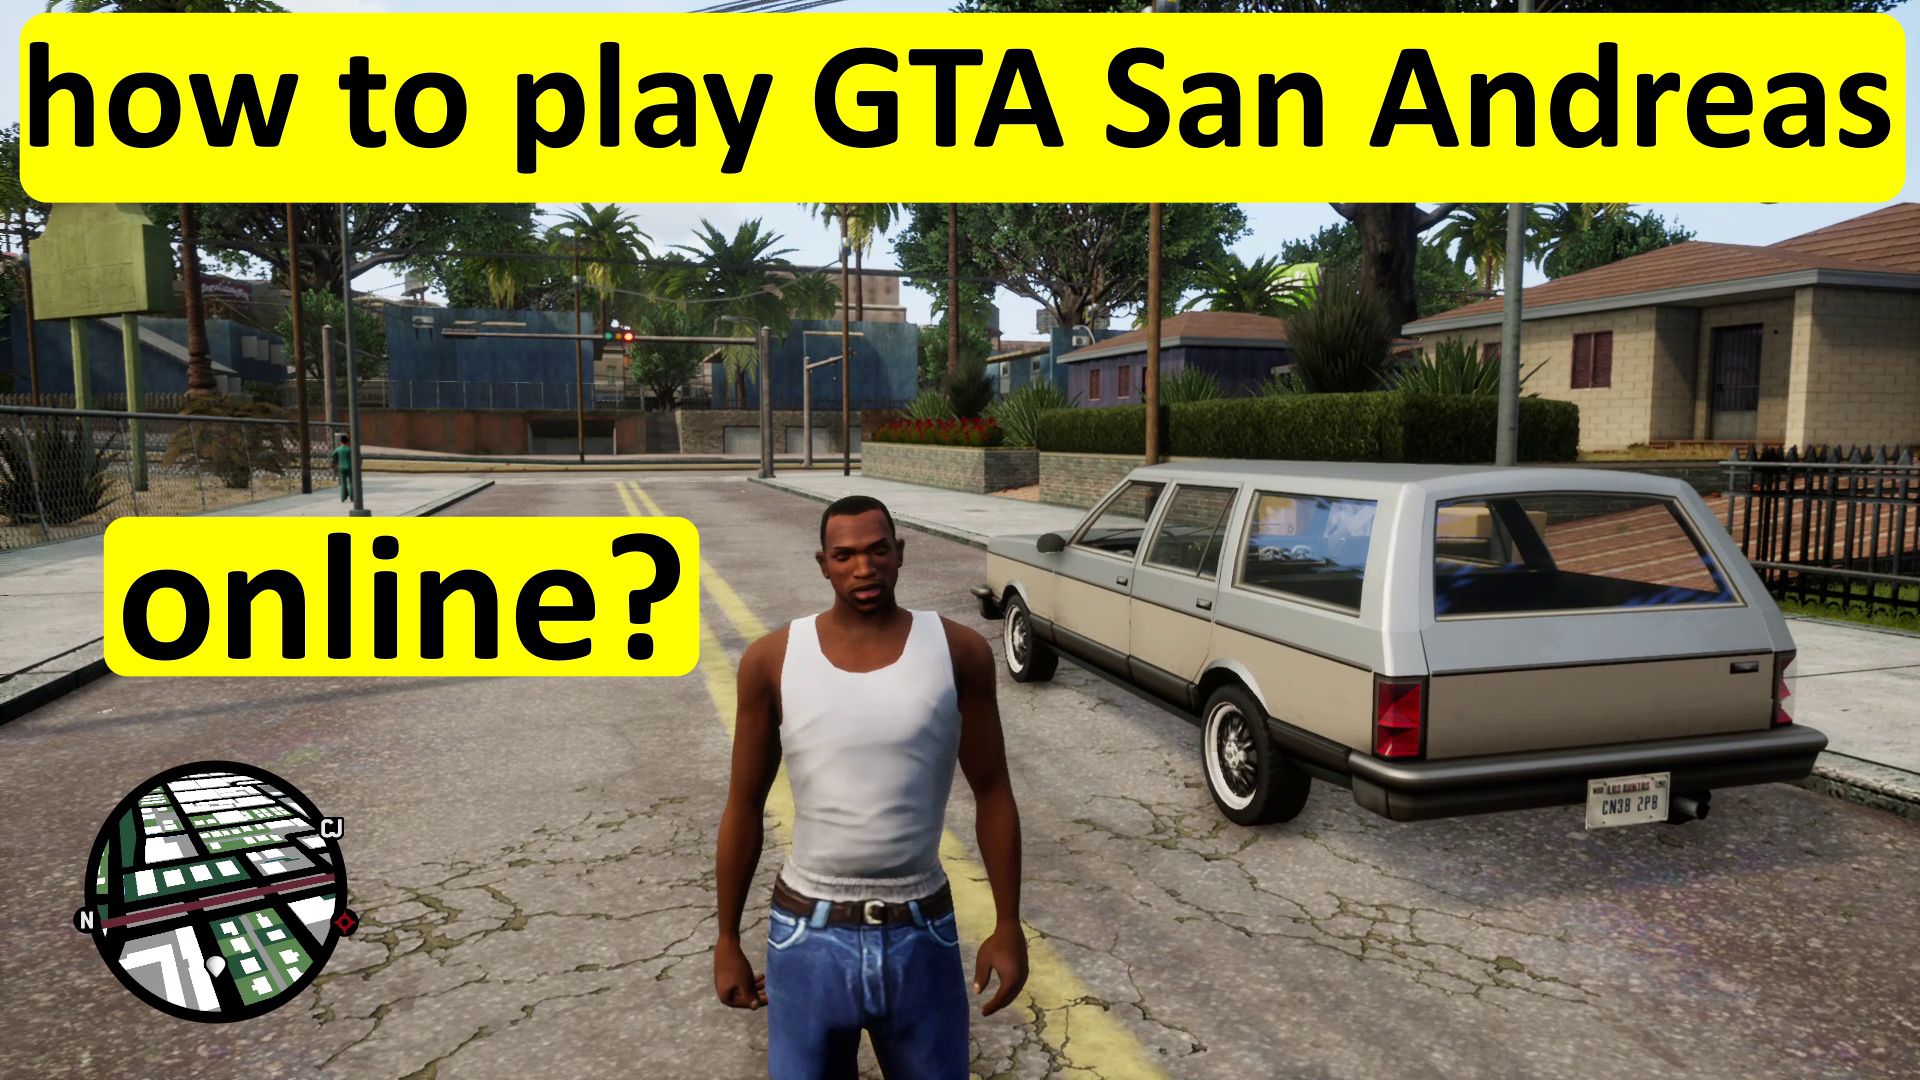 Can we play GTA San Andreas online? Is there any way?